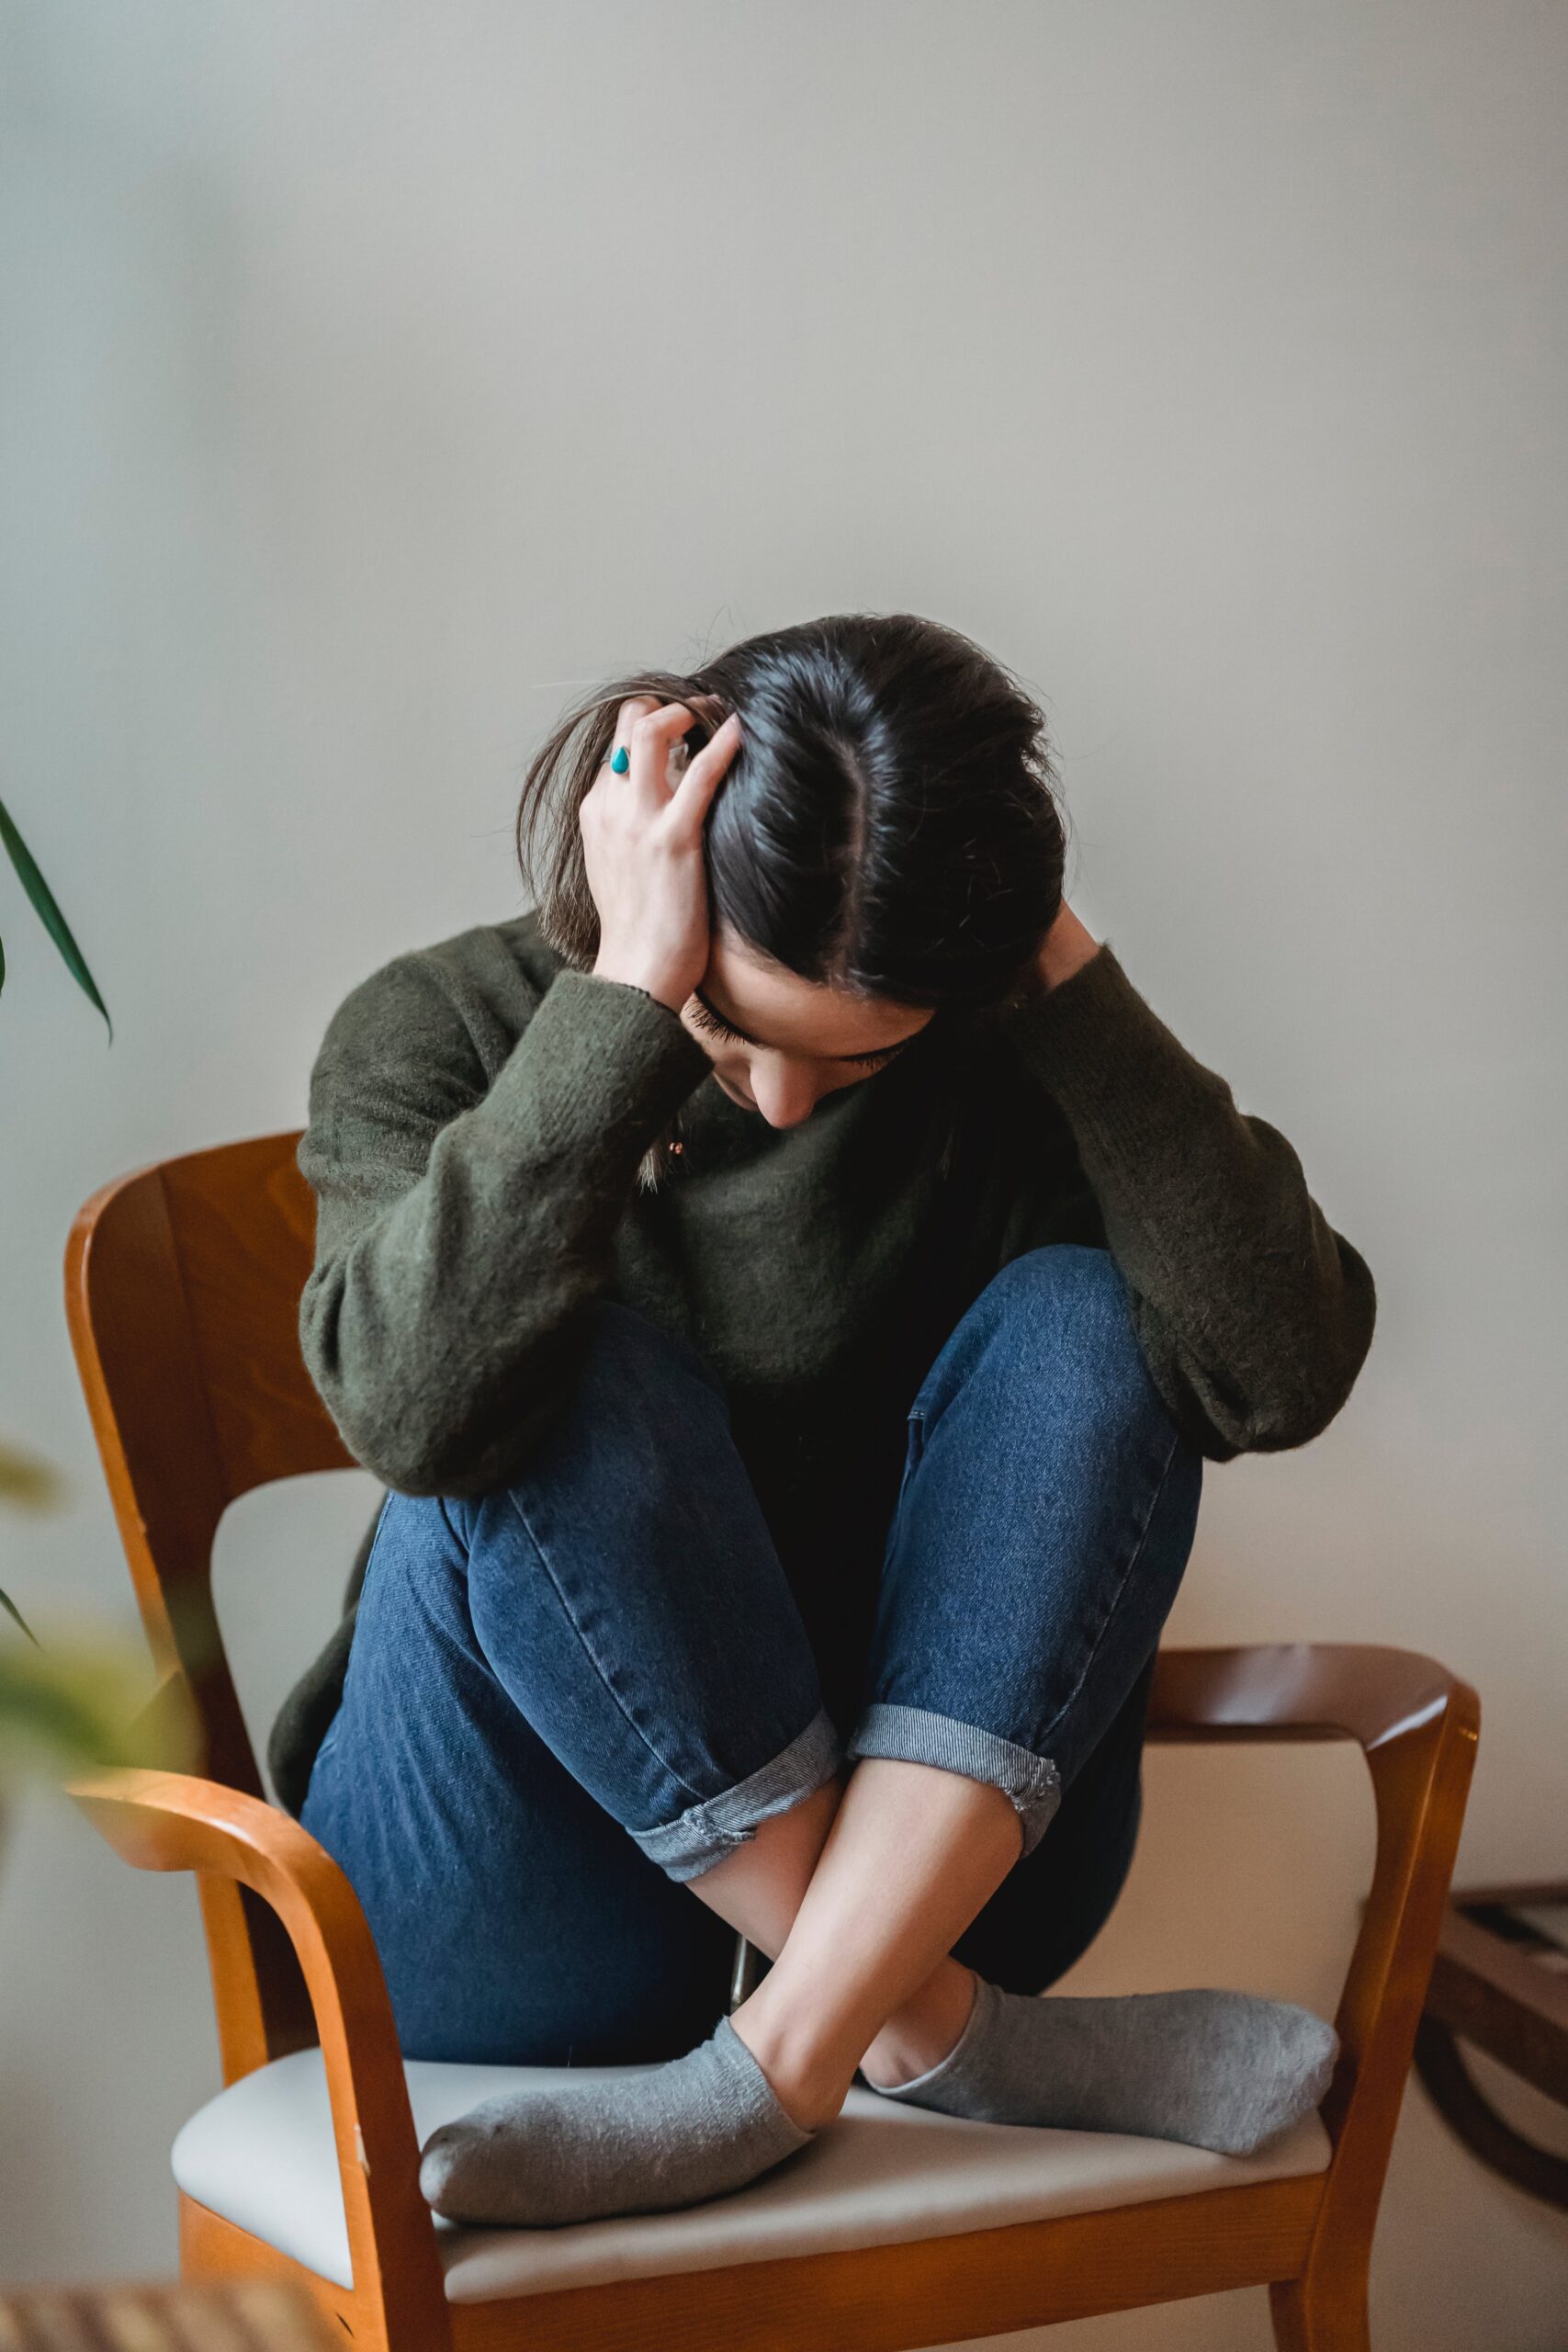 A frustrated woman sitting on a chair with her hands over her ears and head | Source: Pexels